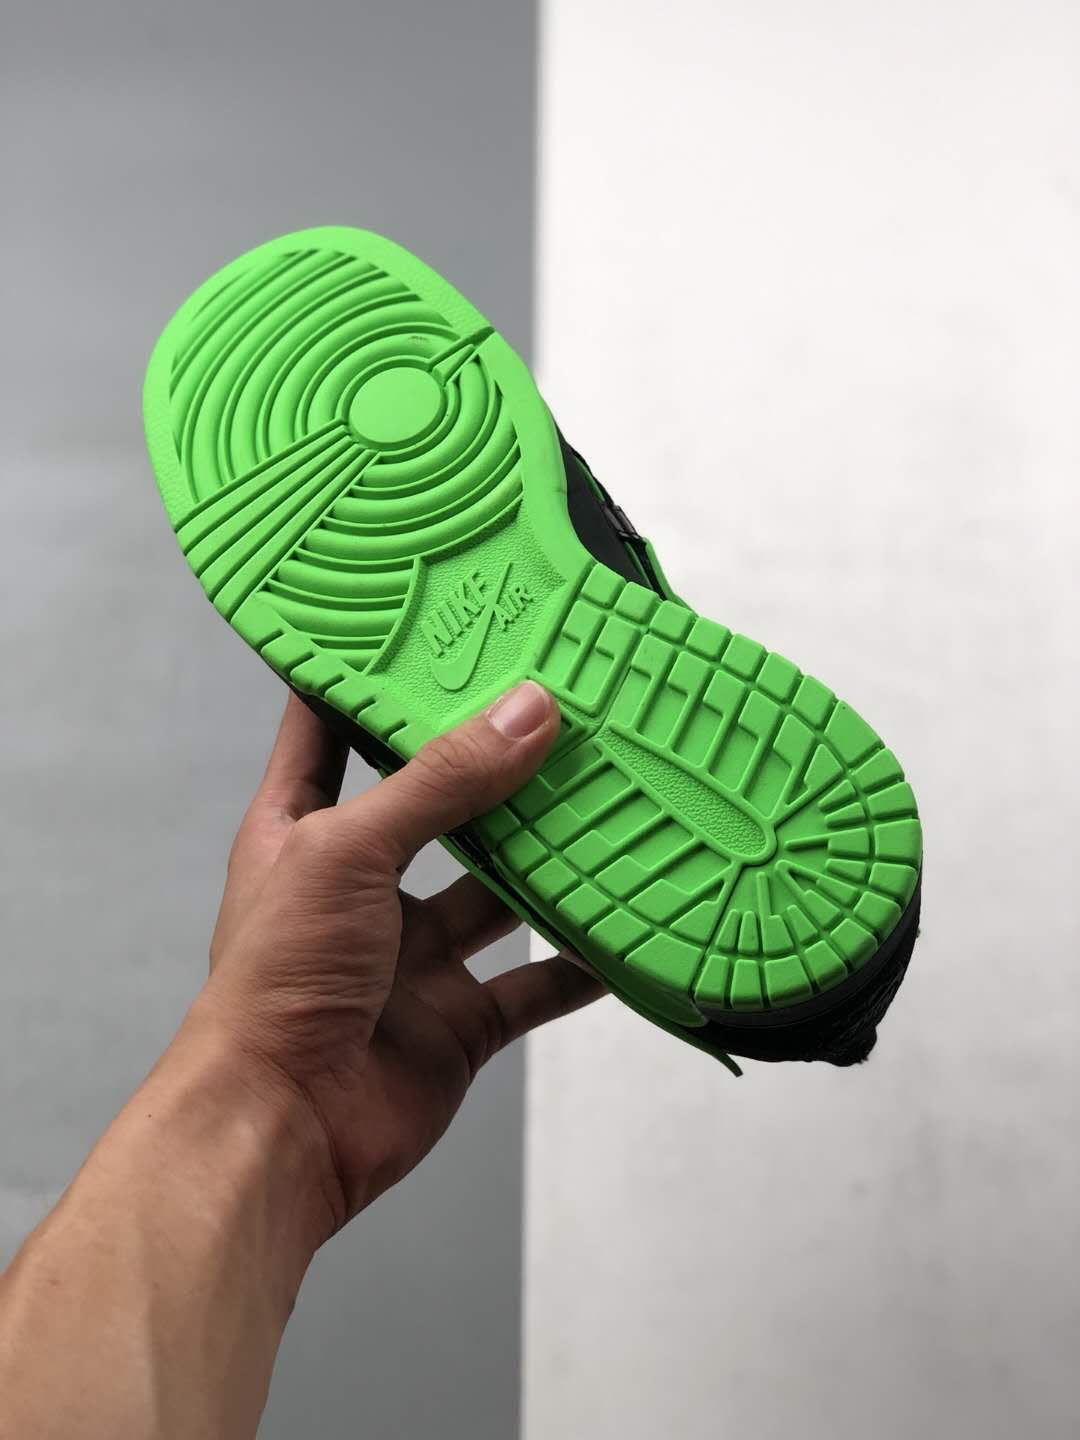 Nike Off-White Air Rubber Dunk 'Green Strike' CU6015-001: Stylish Collaboration with Virgil Abloh